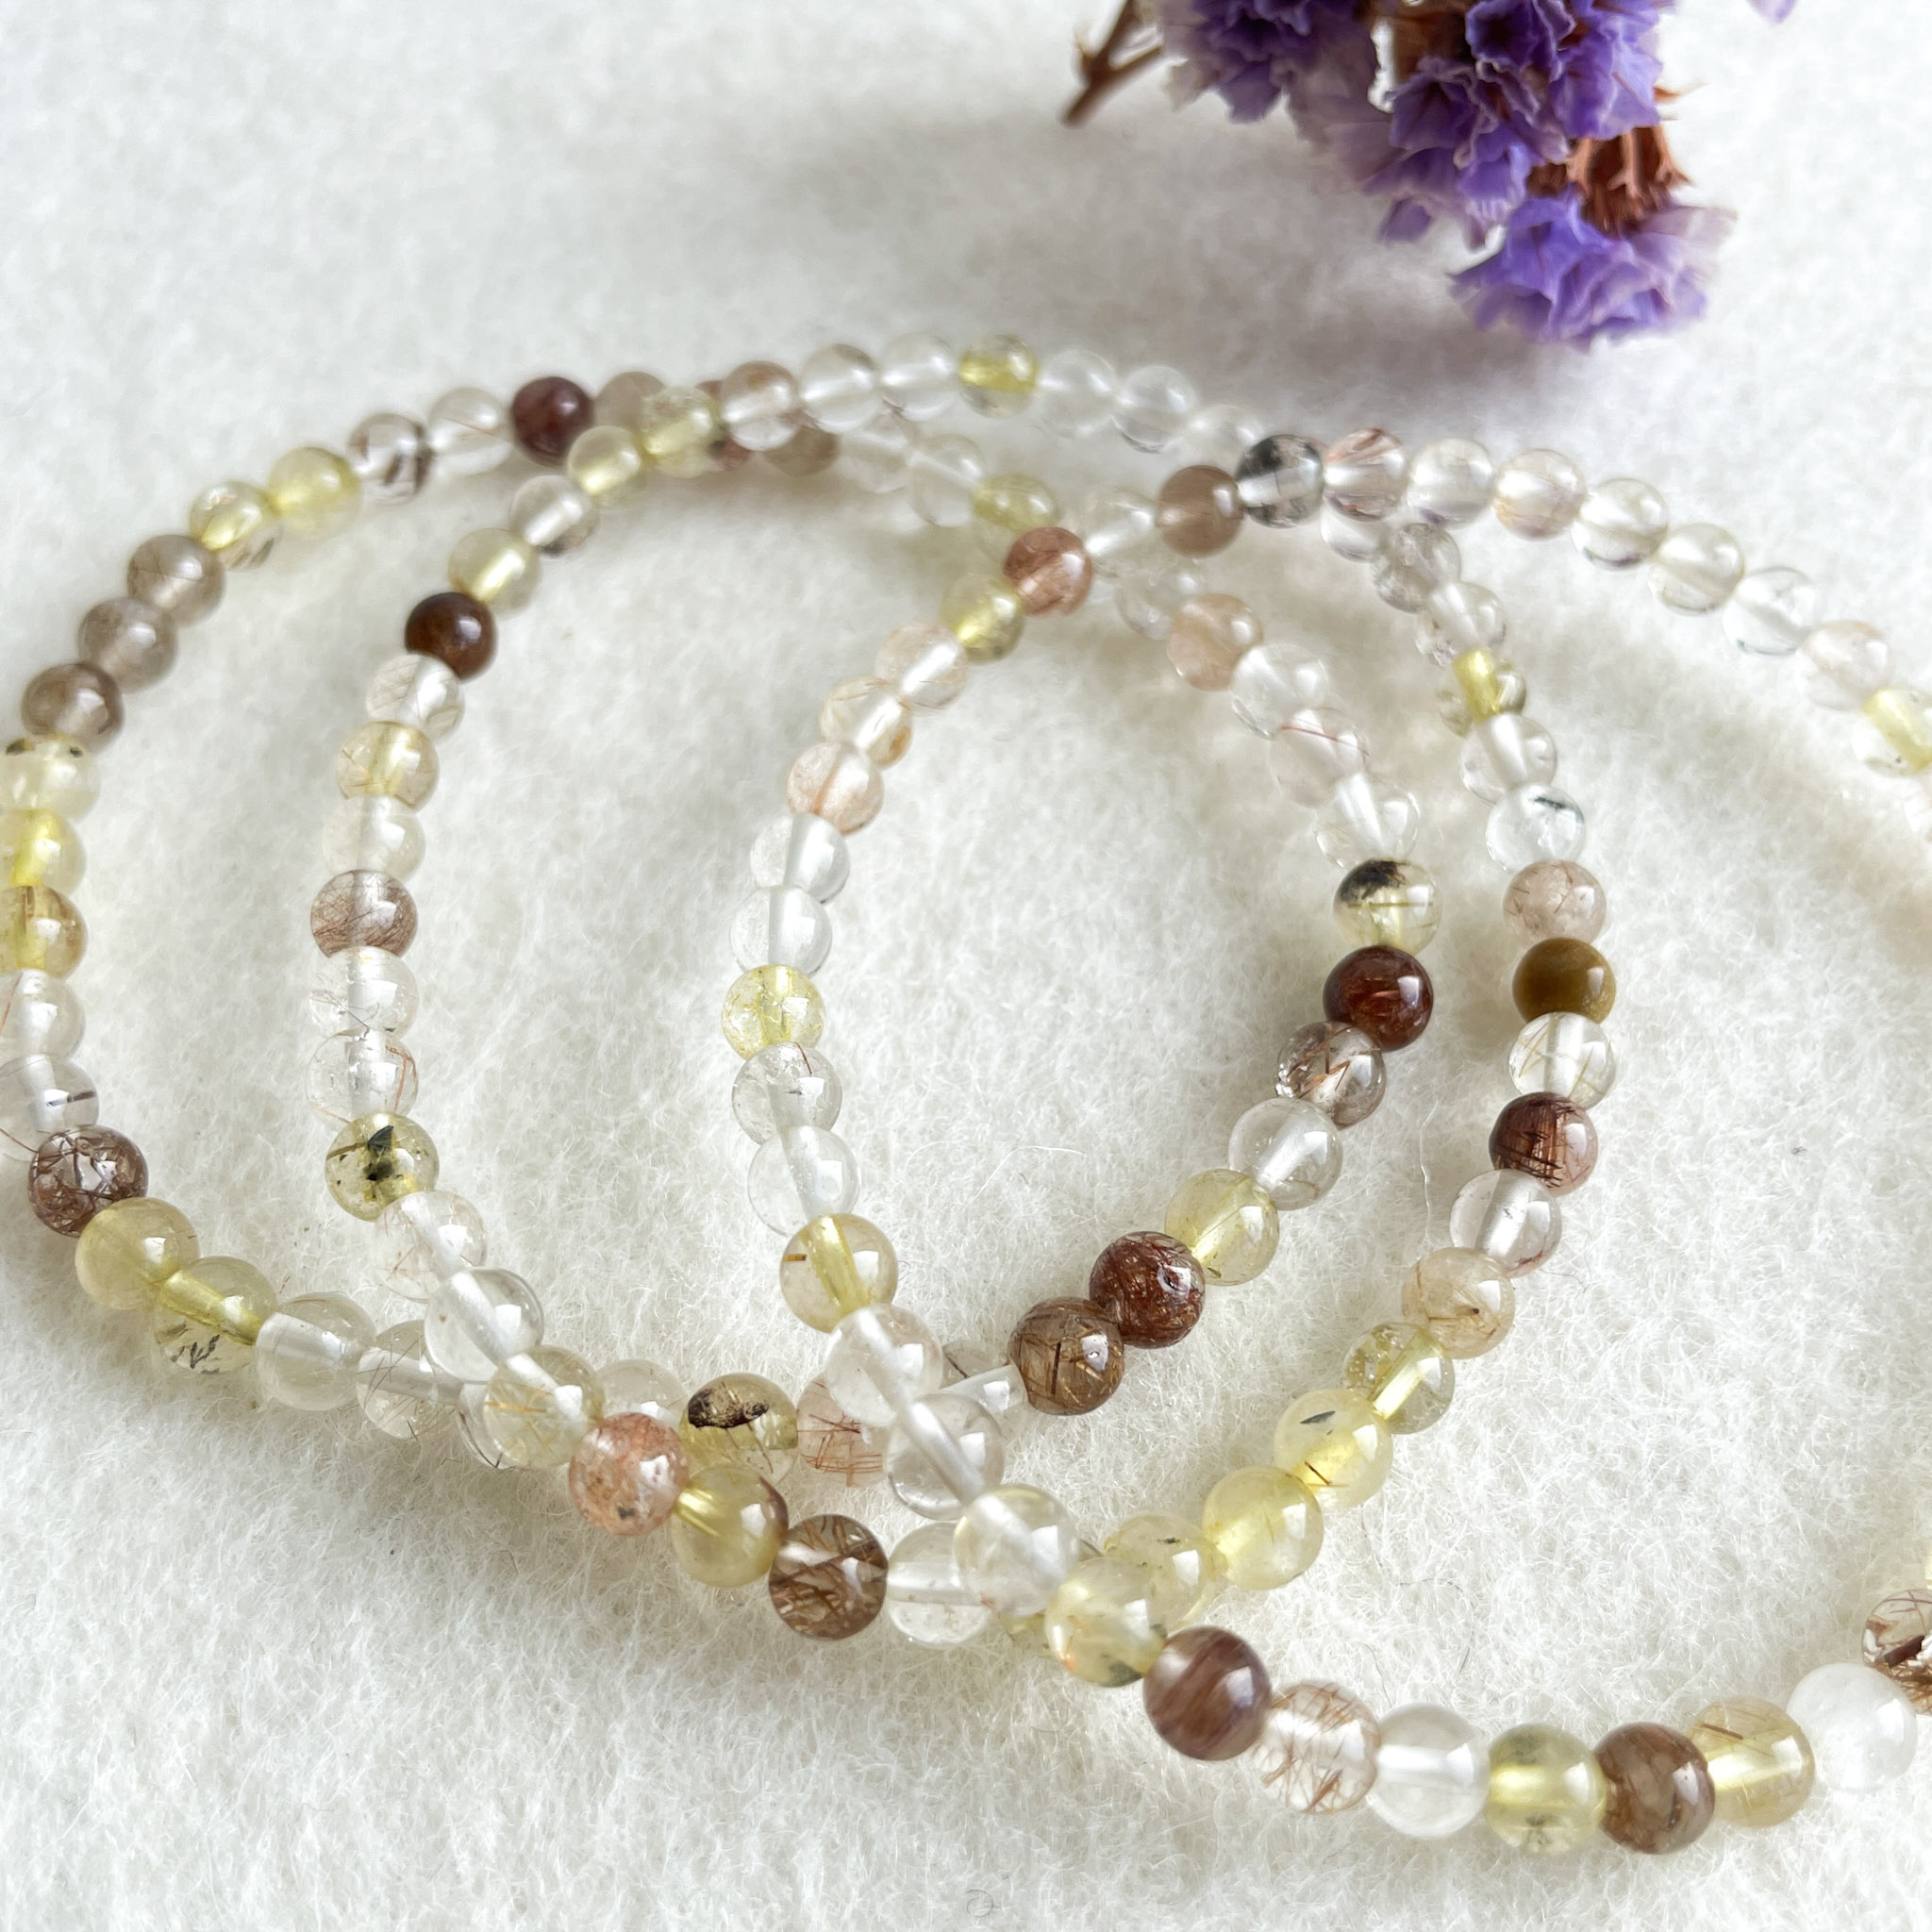 Three strands of crystal bead necklaces with varying shades of brown, yellow, and clear beads, displayed on a white textured background with purple dried flowers partially visible in the background.